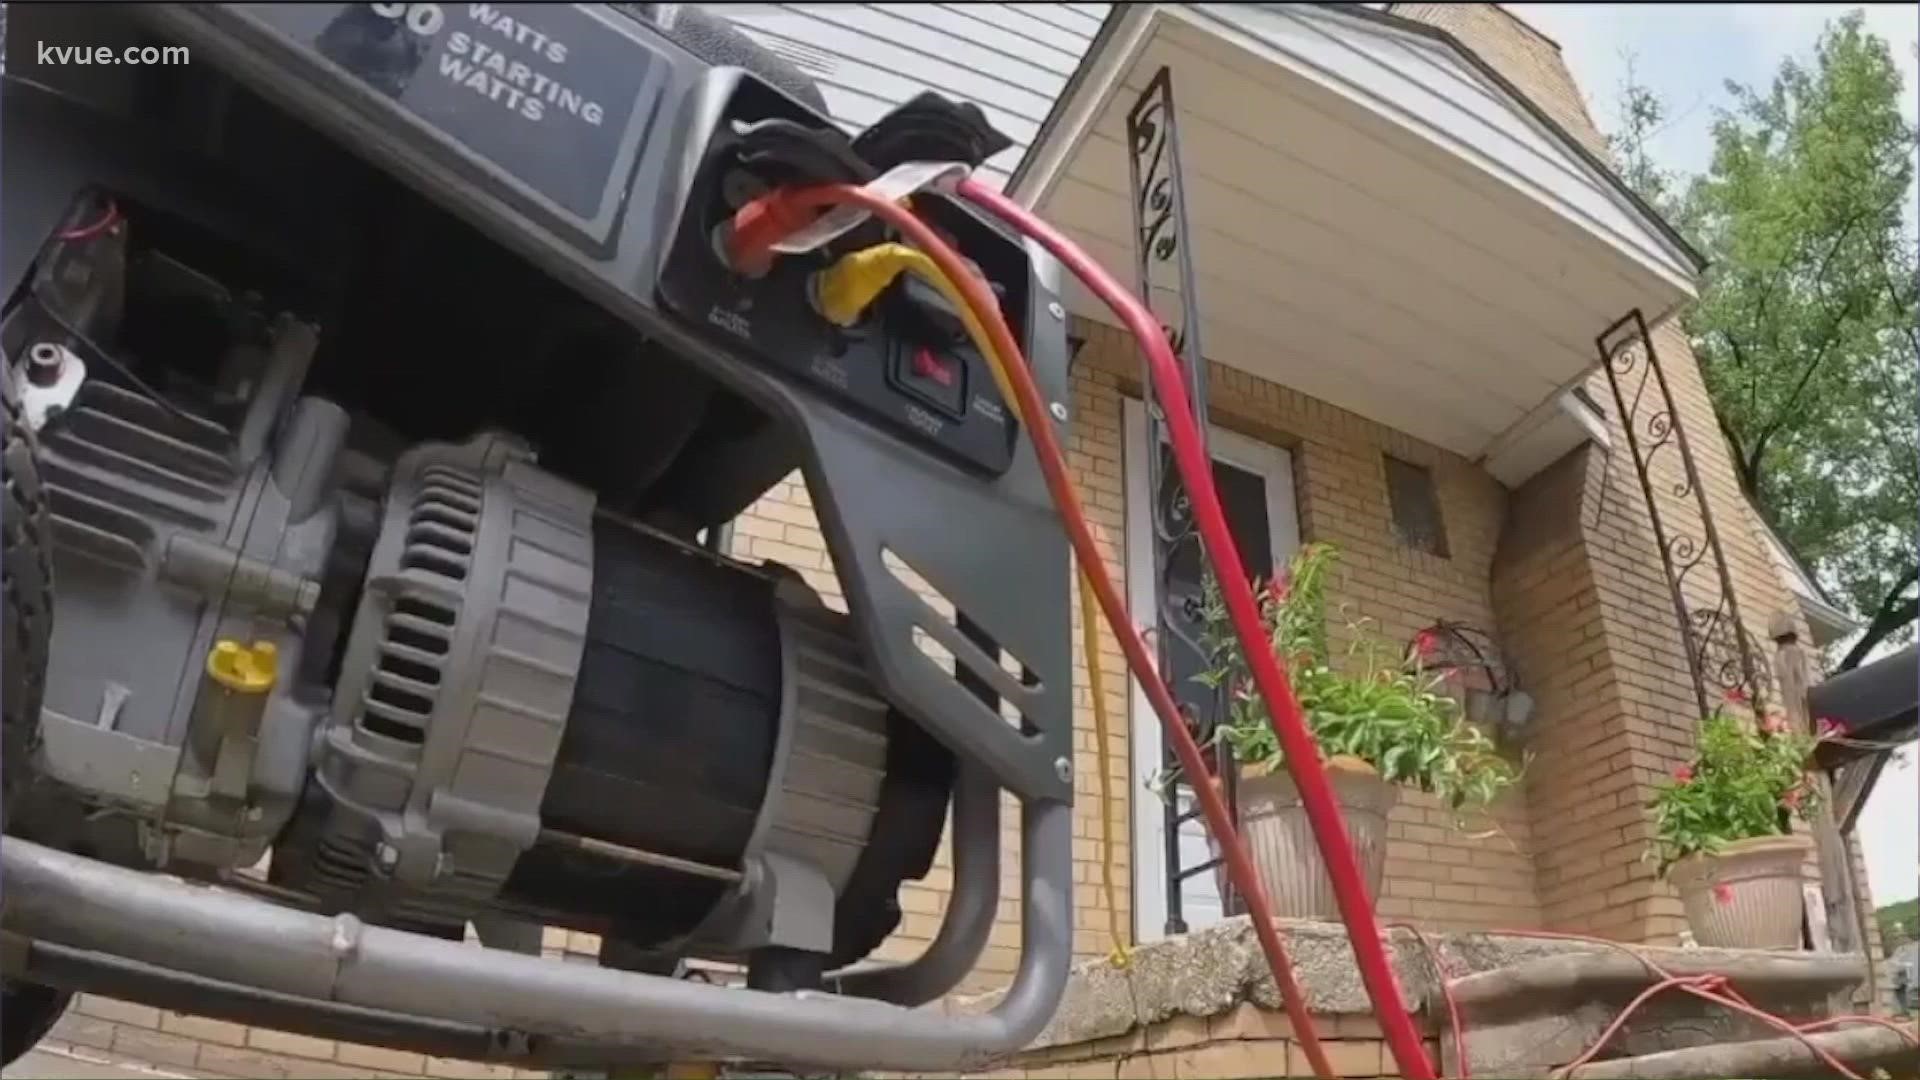 Don't get a generator wet and other safety tips | 13newsnow.com